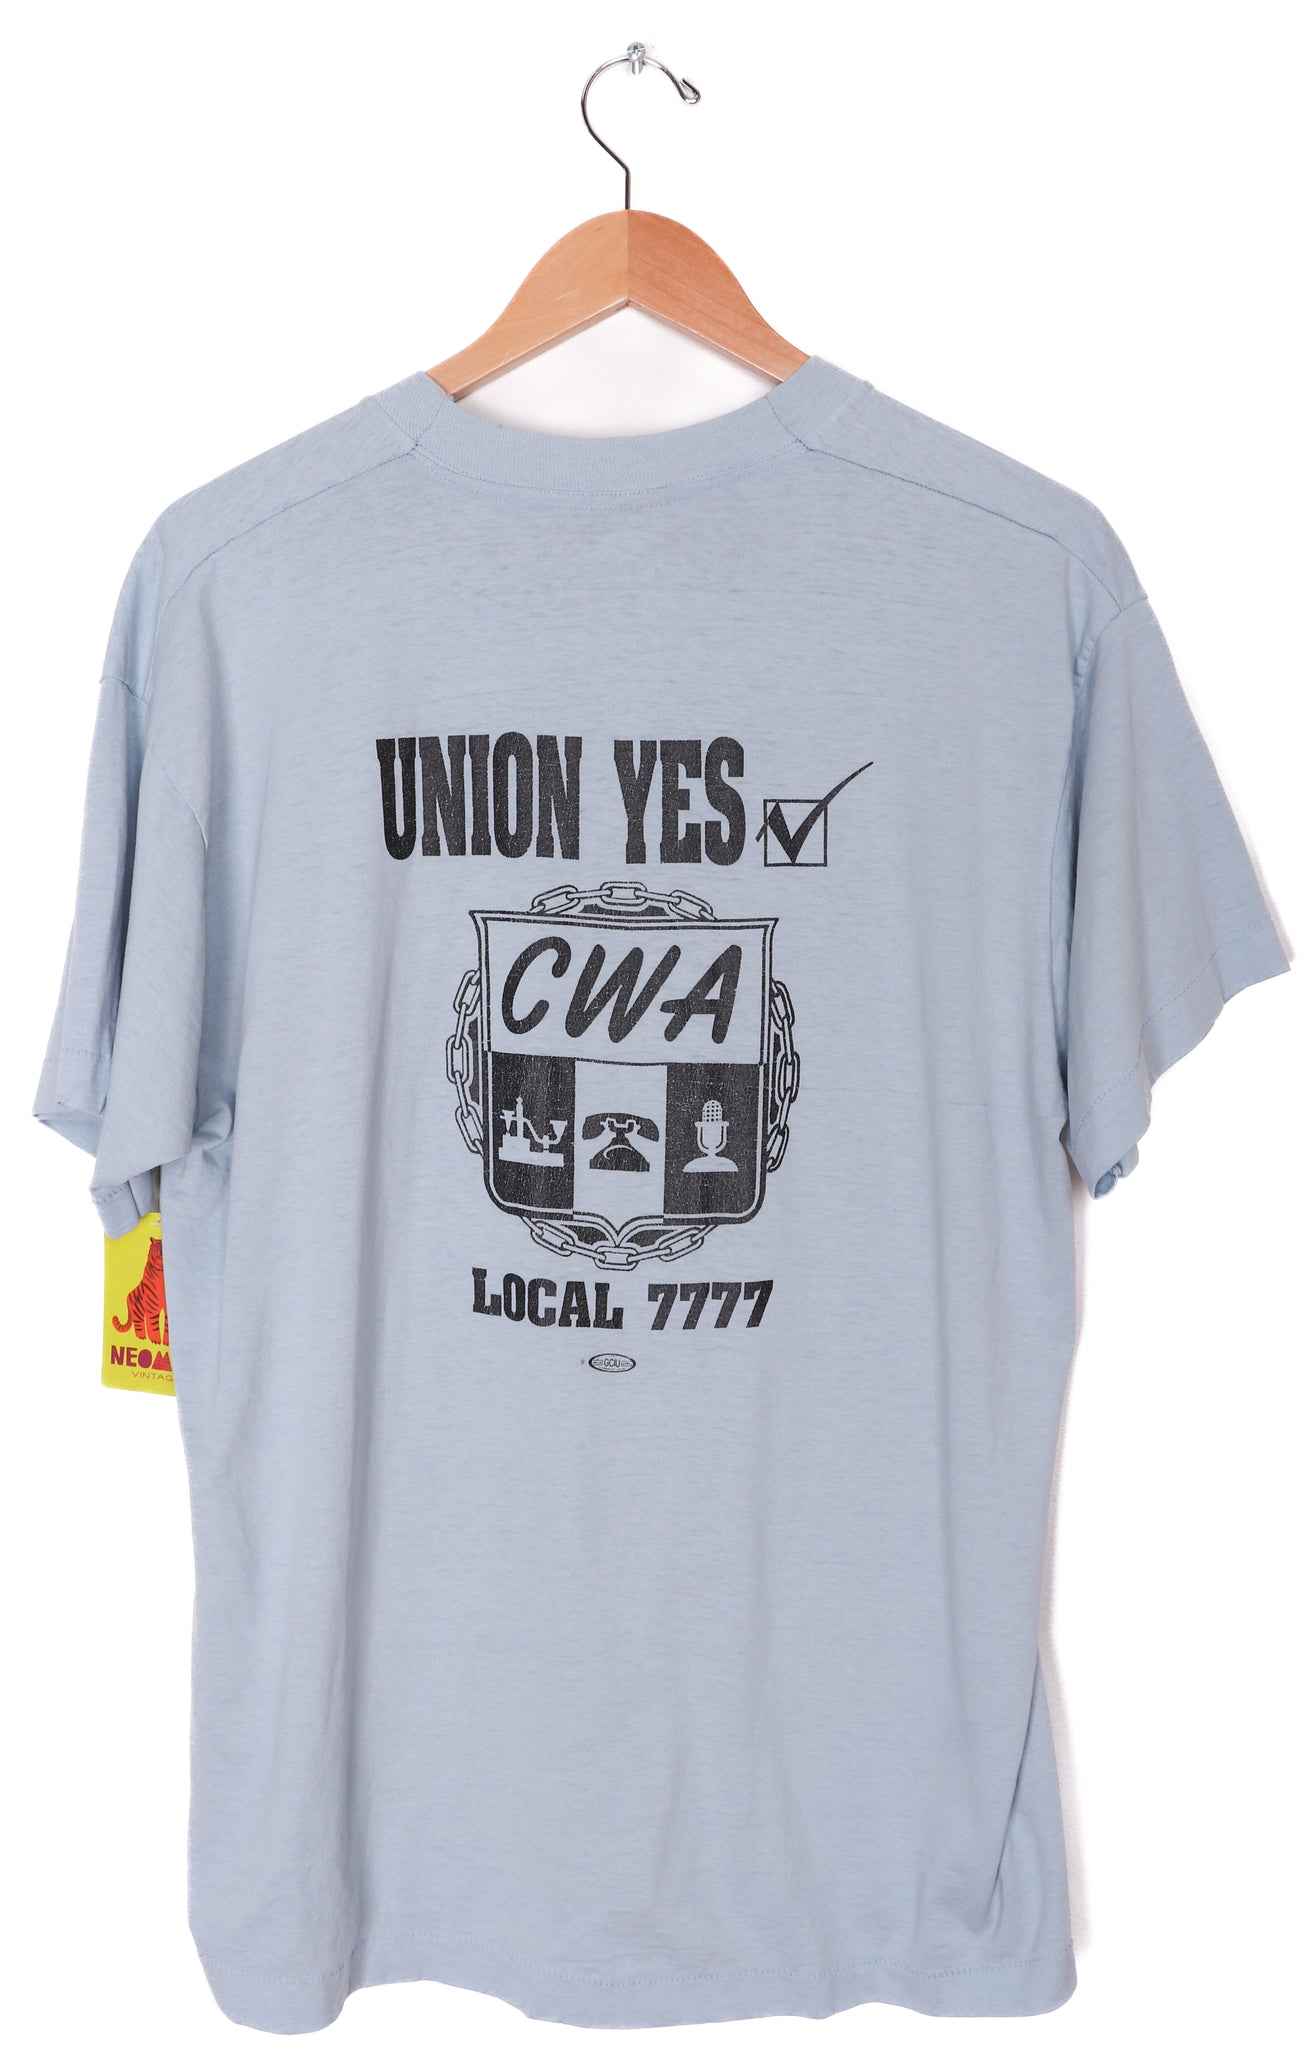 Vintage Early 90s Workers Union Unity T-Shirt